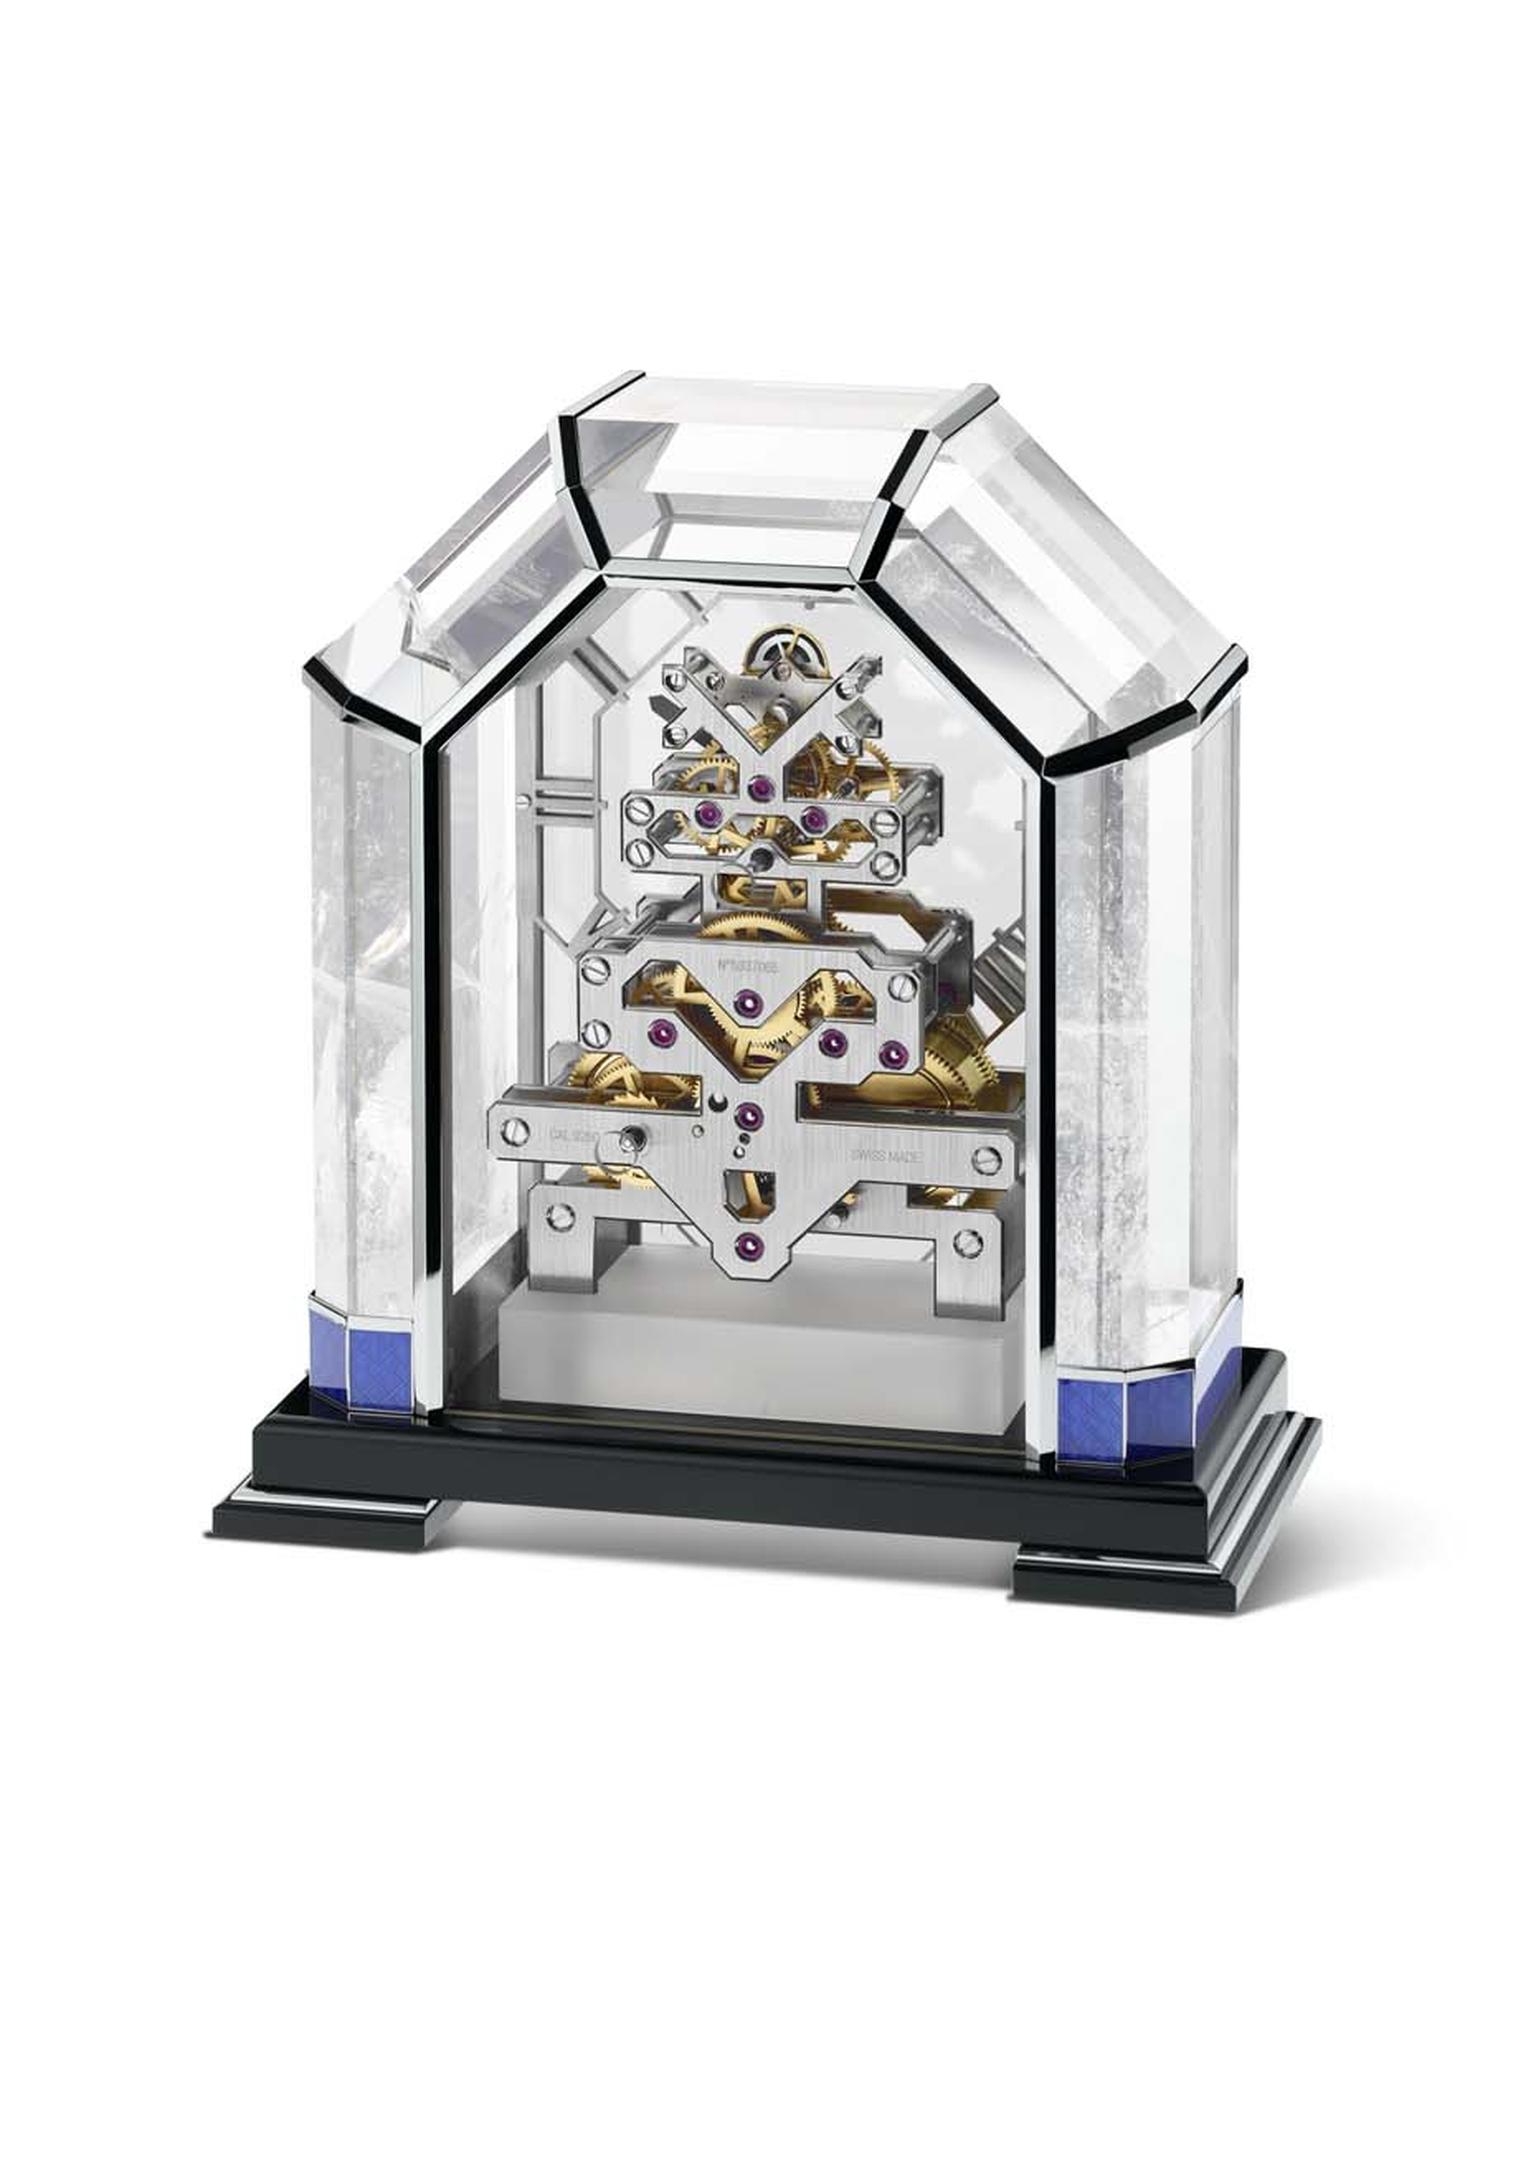 The Vacheron Constantin Arca table clock required the dexterity of a master stonecutter and a master glassmaker to reveal the intrinsic beauty of the rock crystal. Sitting on an obsidian plinth, the piers of the arch feature blue Grand Feu enamelling and 